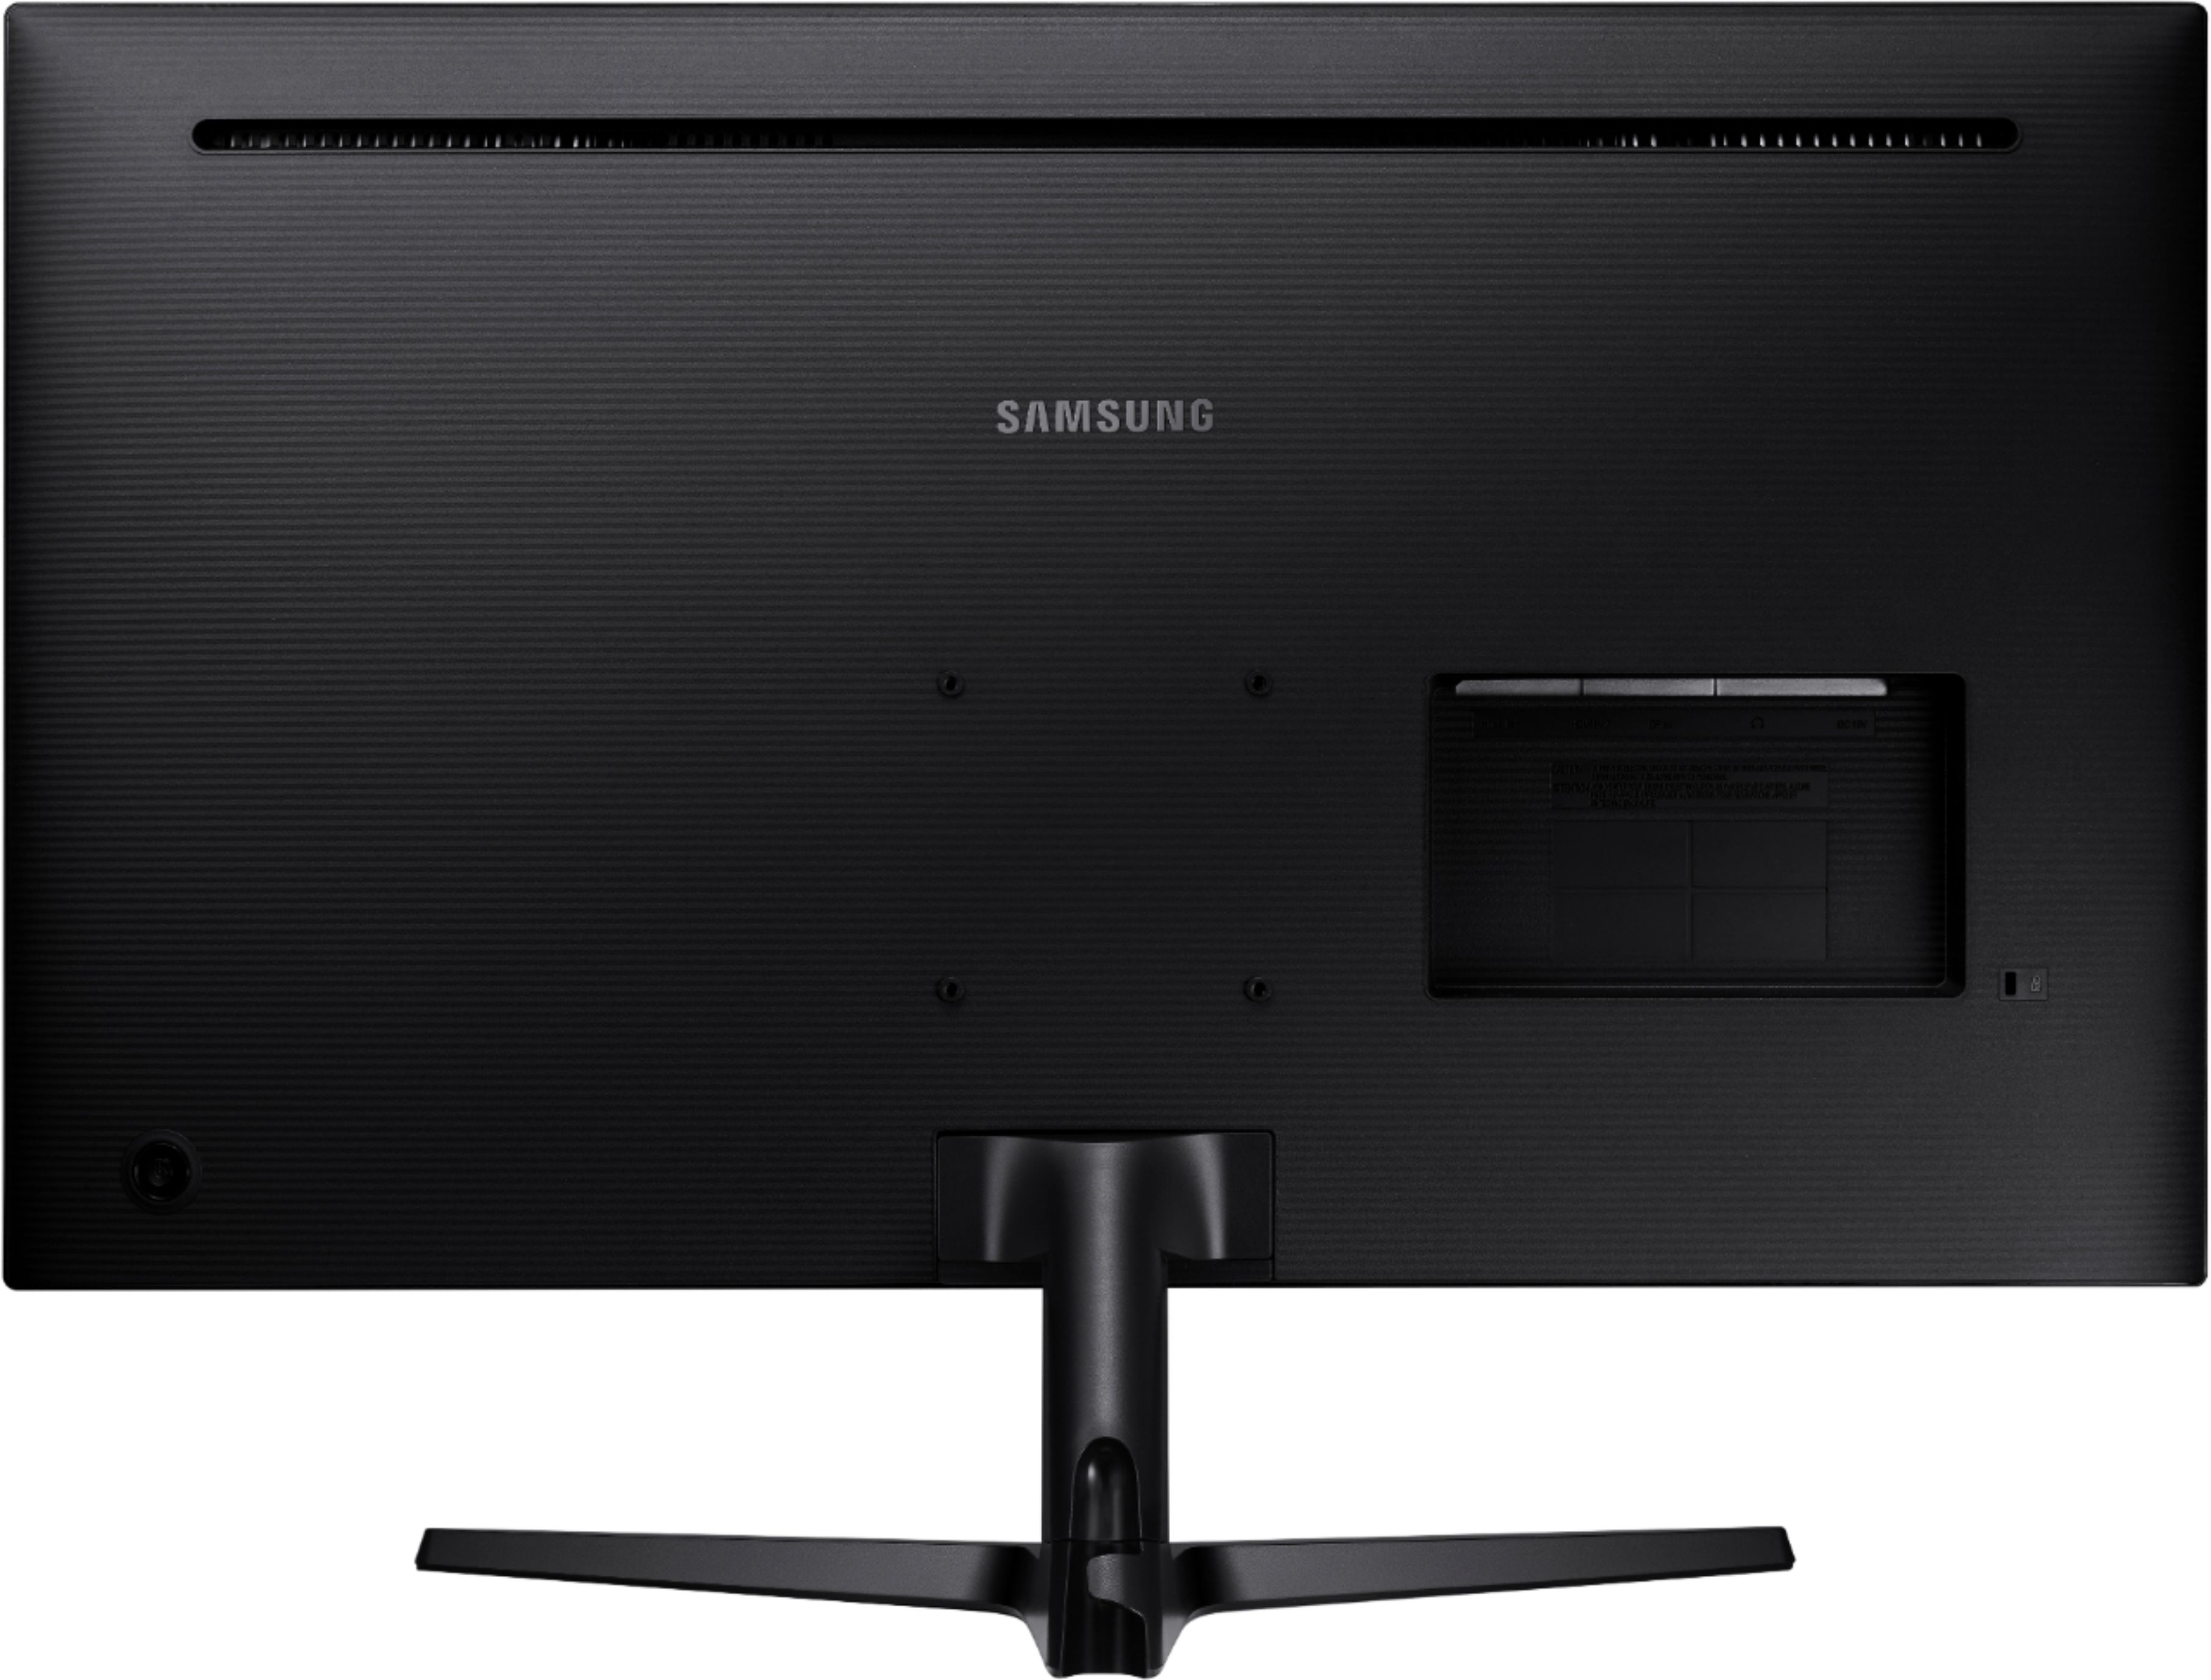 Back View: Samsung - G77 Series  32" Curved WQHD Gaming Monitor With Special T1 Faker Design (HDMI, USB) - Black